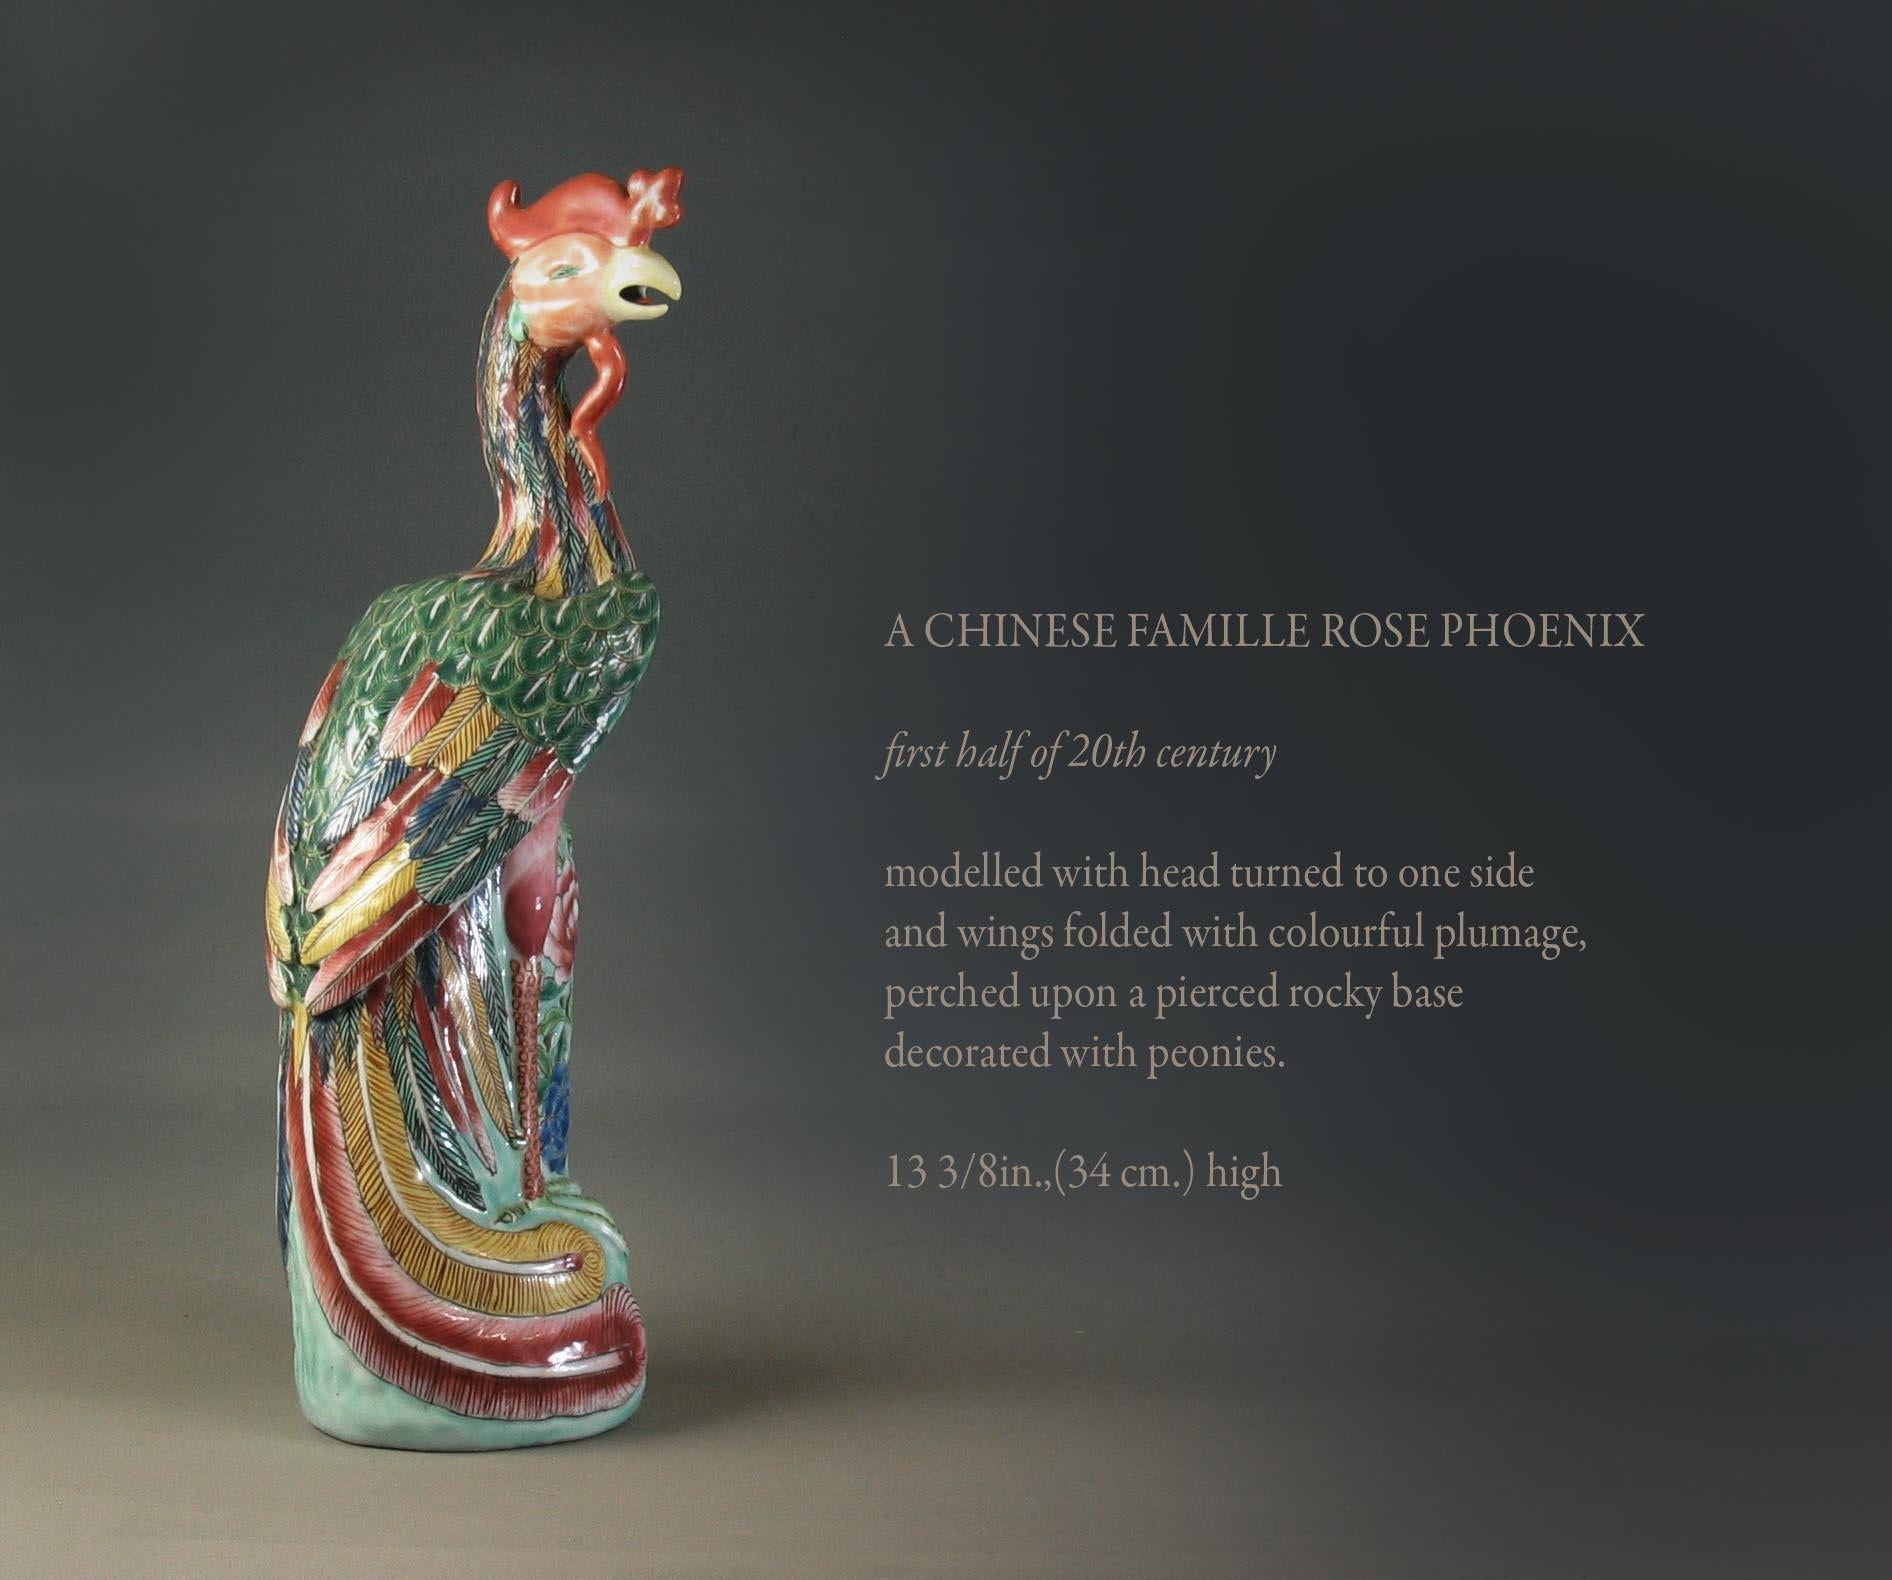 A Chinese Famille Rose Phoenix

First half of 20th century.

Modelled with head turned to one side 
and wings folded with colorful plumage,
perched upon a pierced rocky base 
decorated with peonies.

Measures: 13 3/8in.,(34 cm.) high.